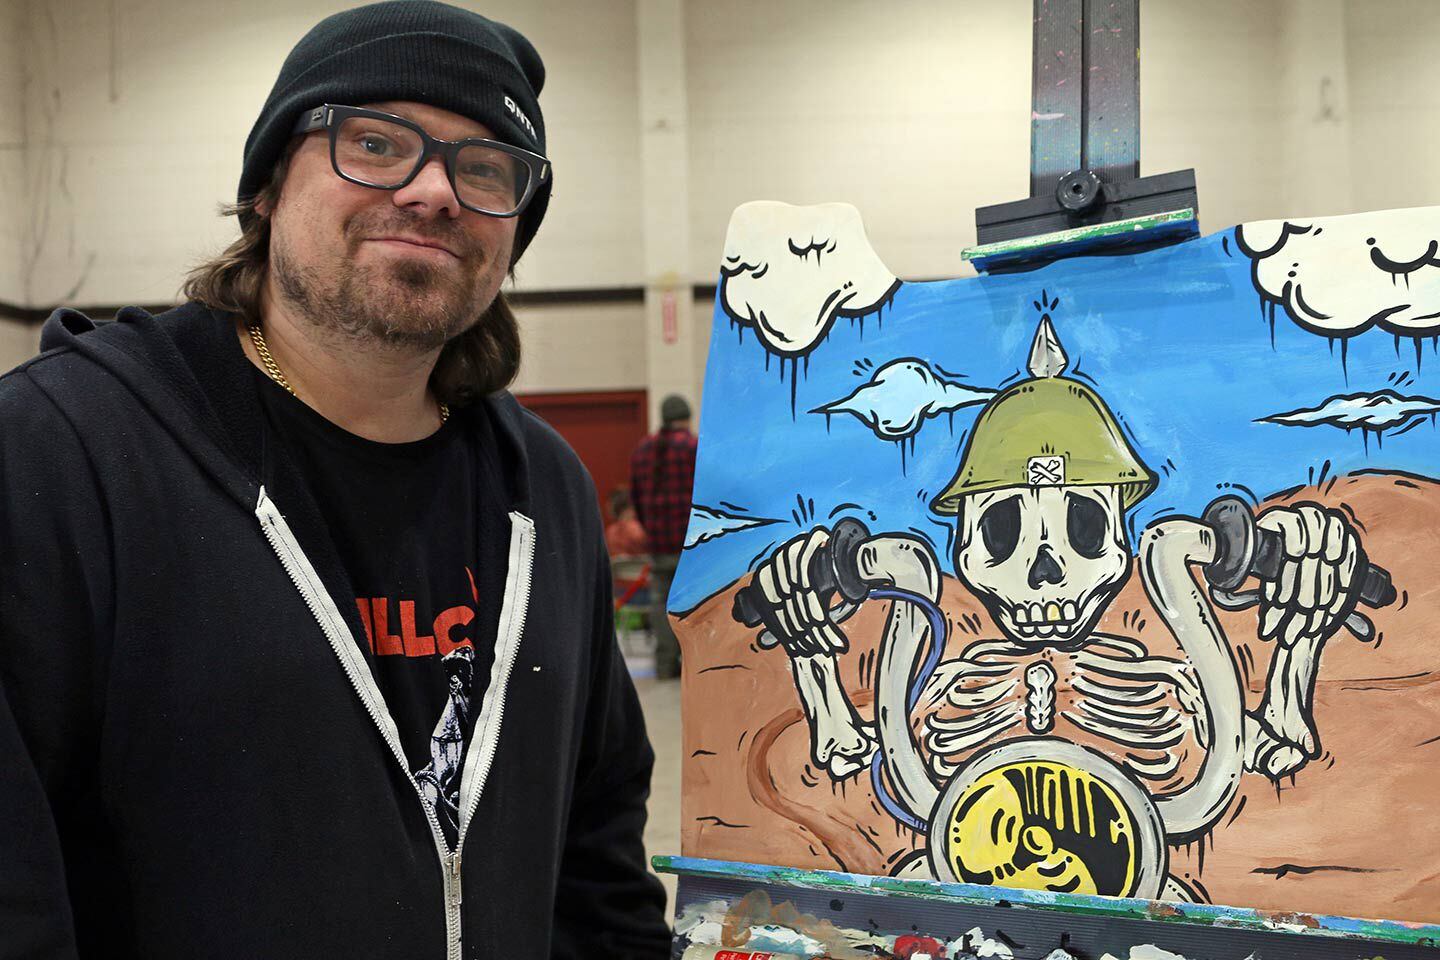 Salem, Oregon–based artist and muralist @jonezyartwork travels to different events like the Cherry City Classic doing live painting demonstrations and selling his original artwork.